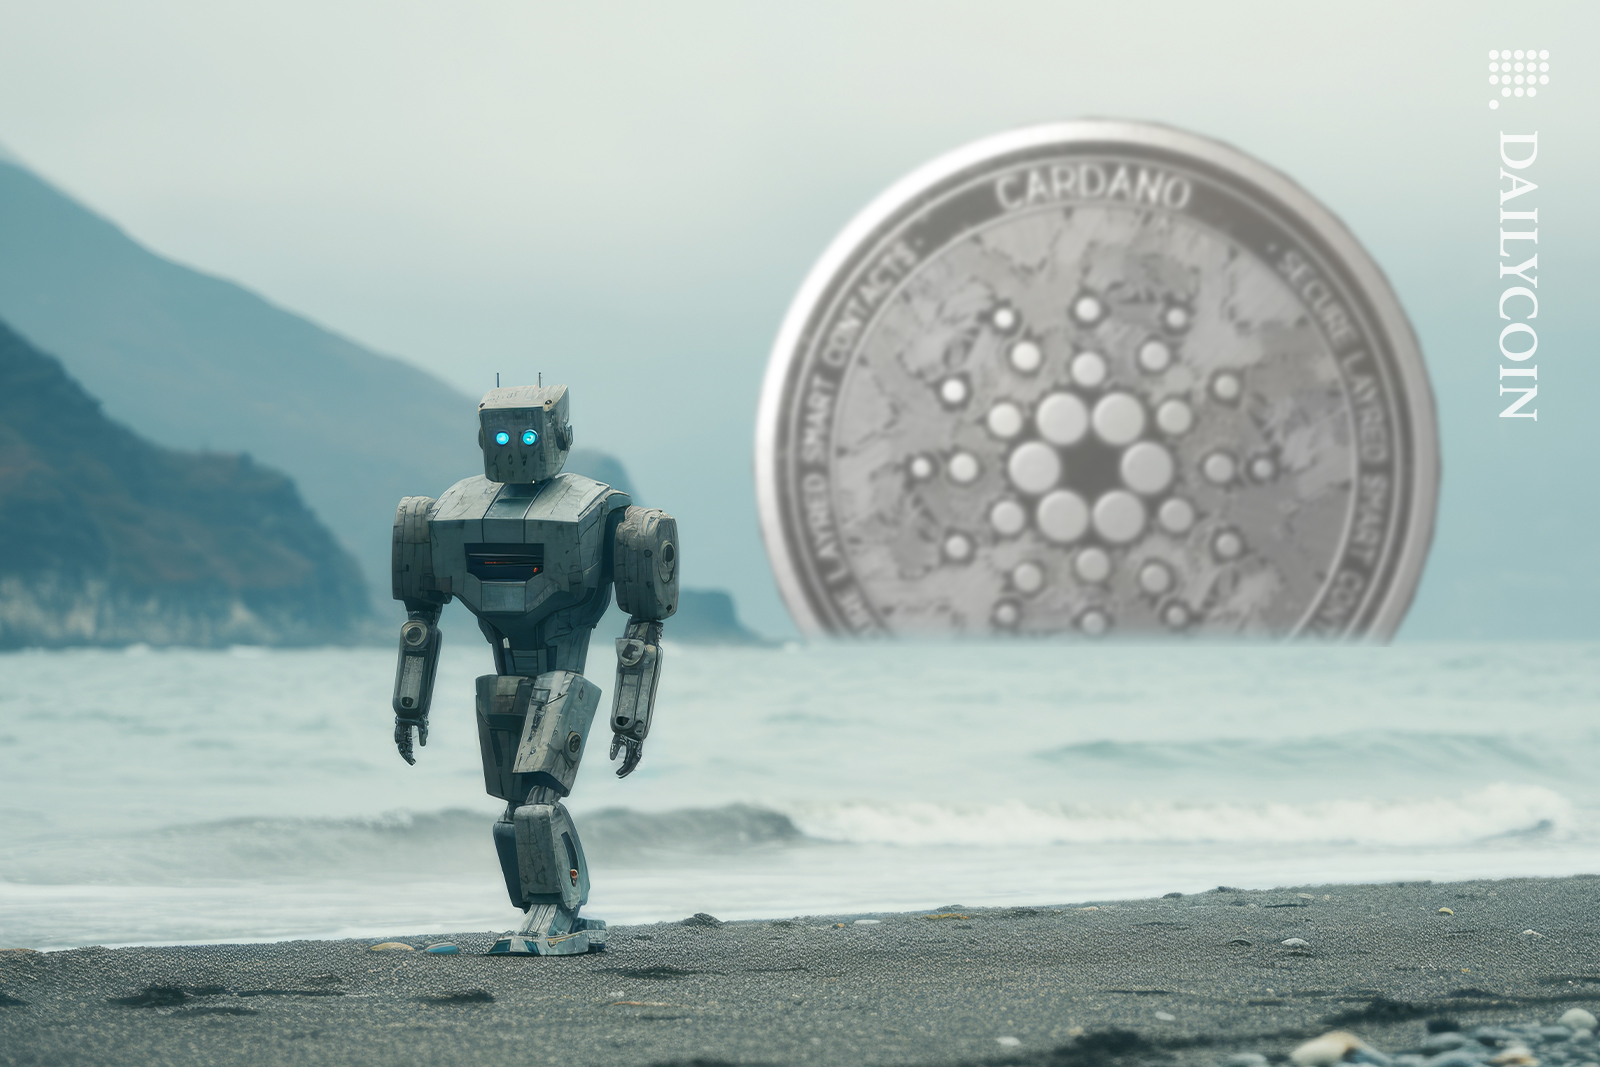 Sad Robot walking across the beach with sloomy weather and Cardano coin in the horizon.